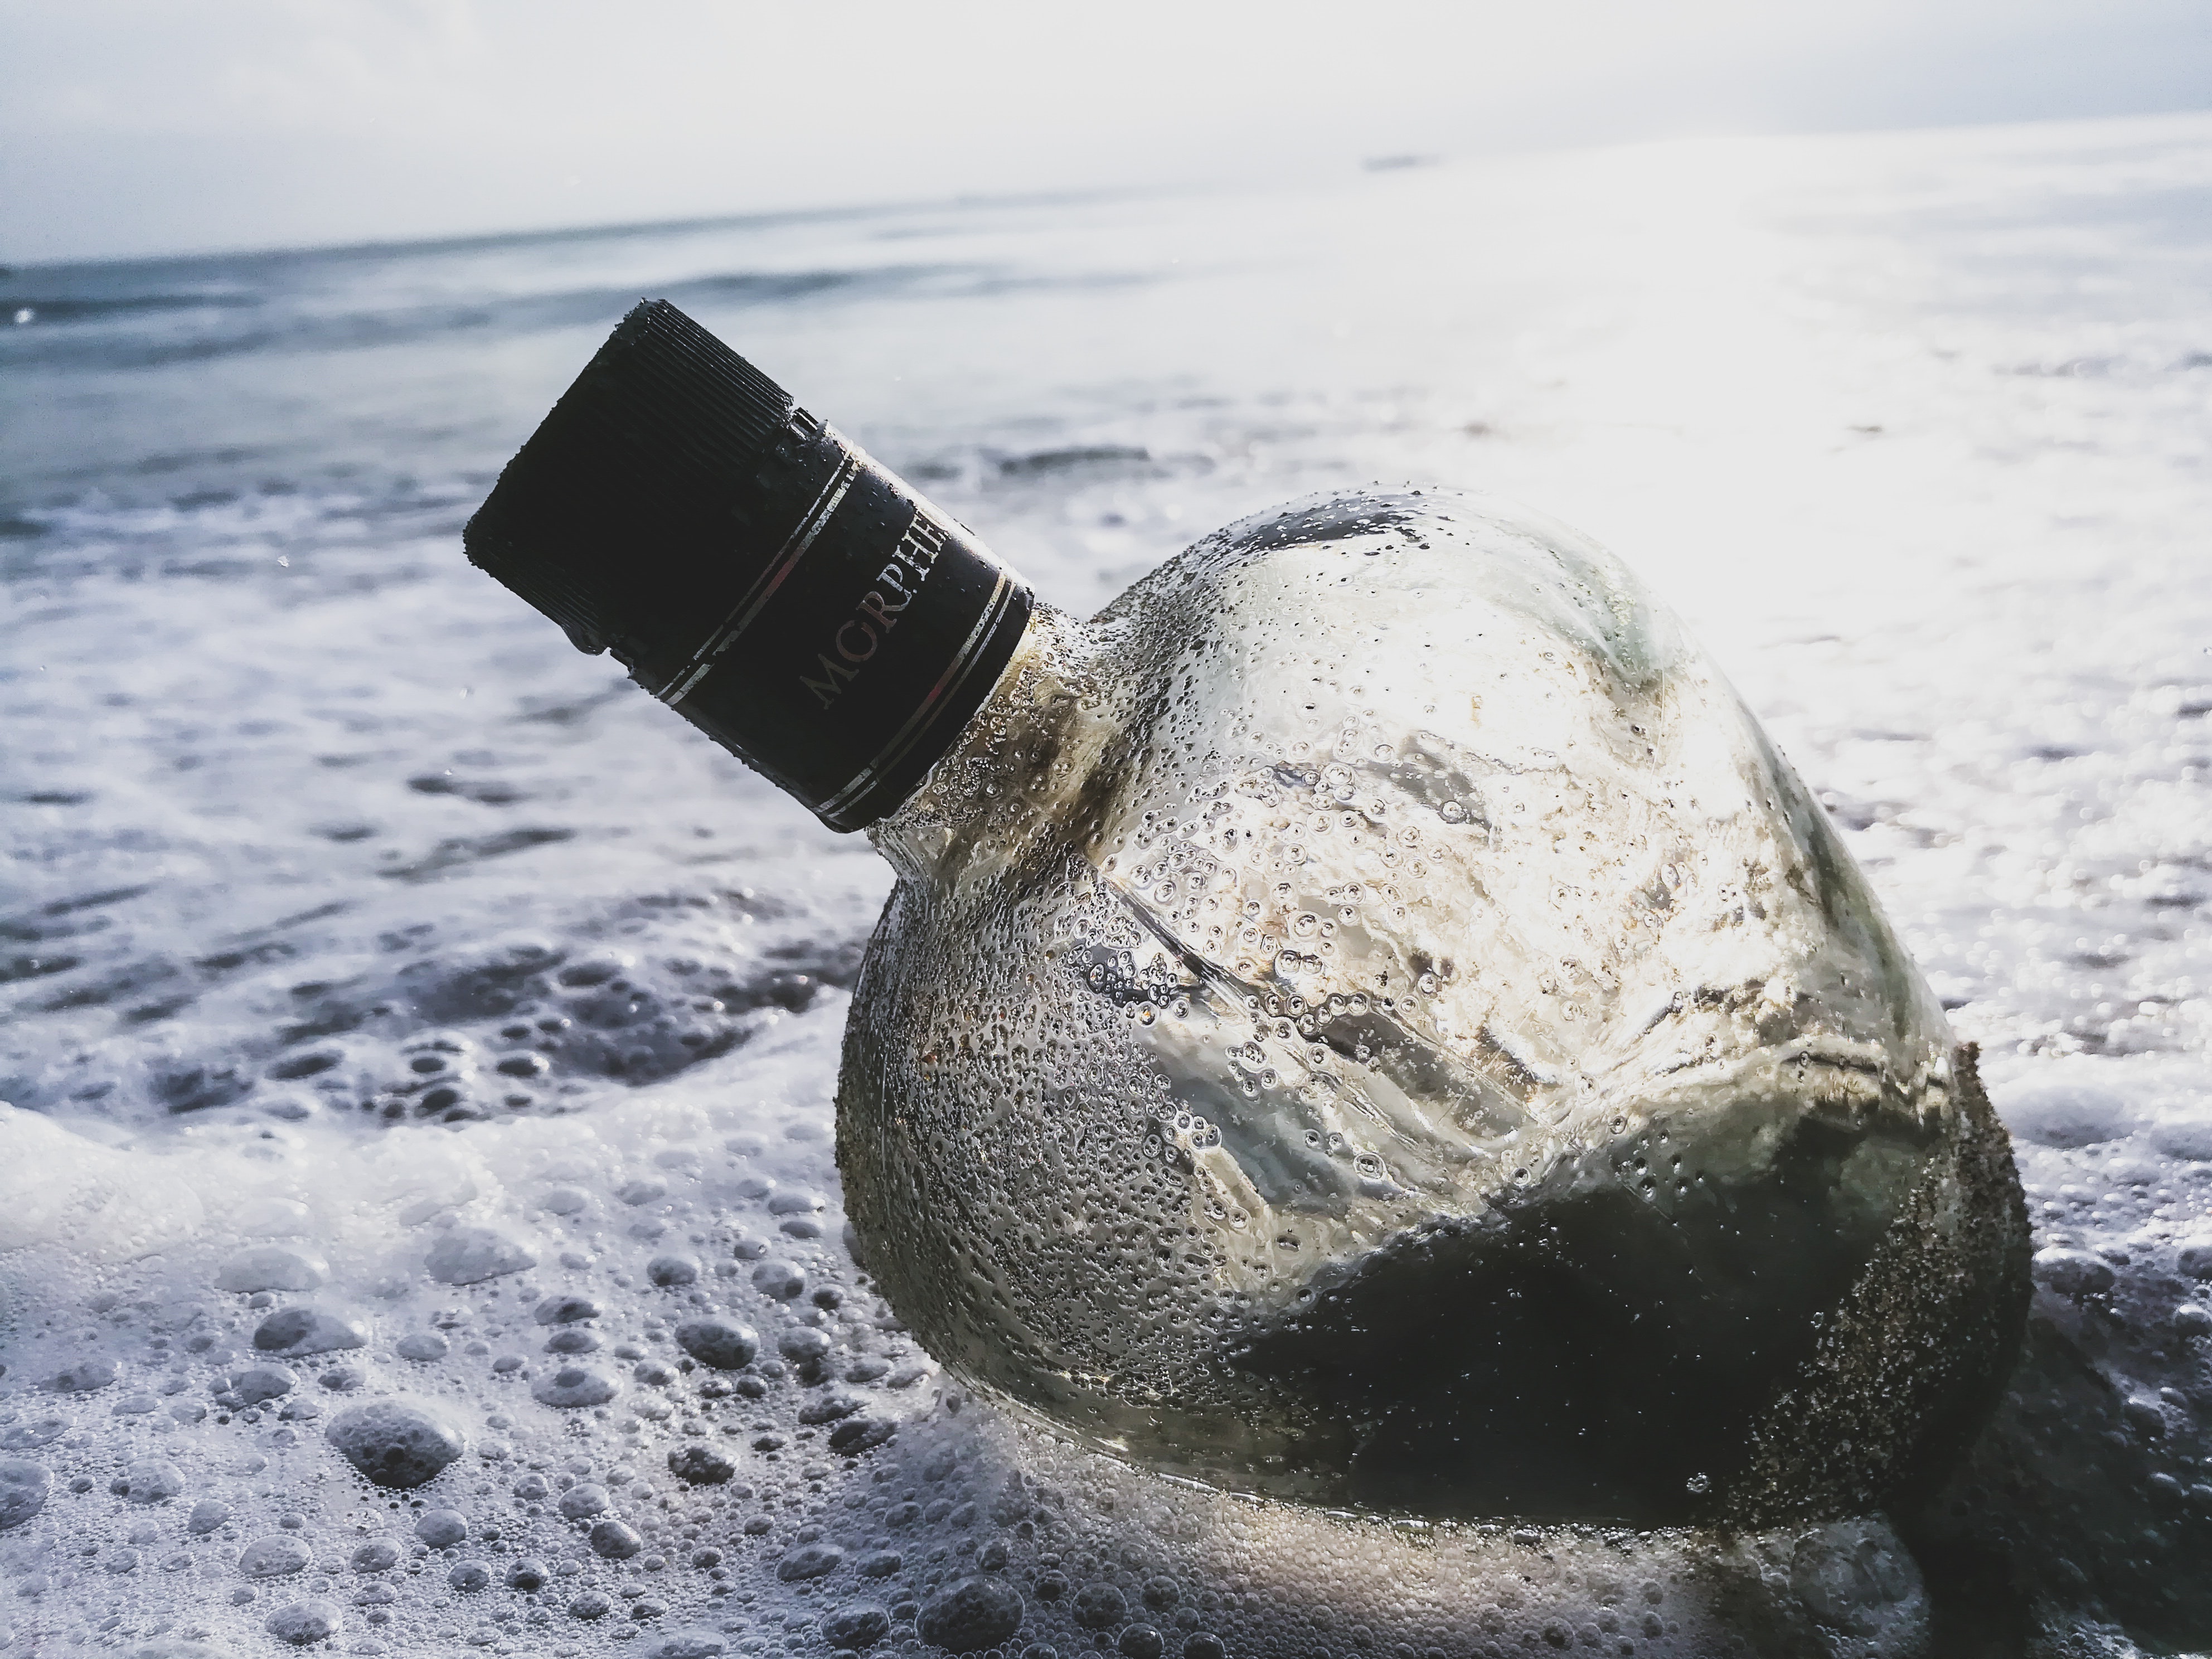 Clear Glass Bottle on Body of Water, Alcohol, Sand, Travel, Shore, HQ Photo